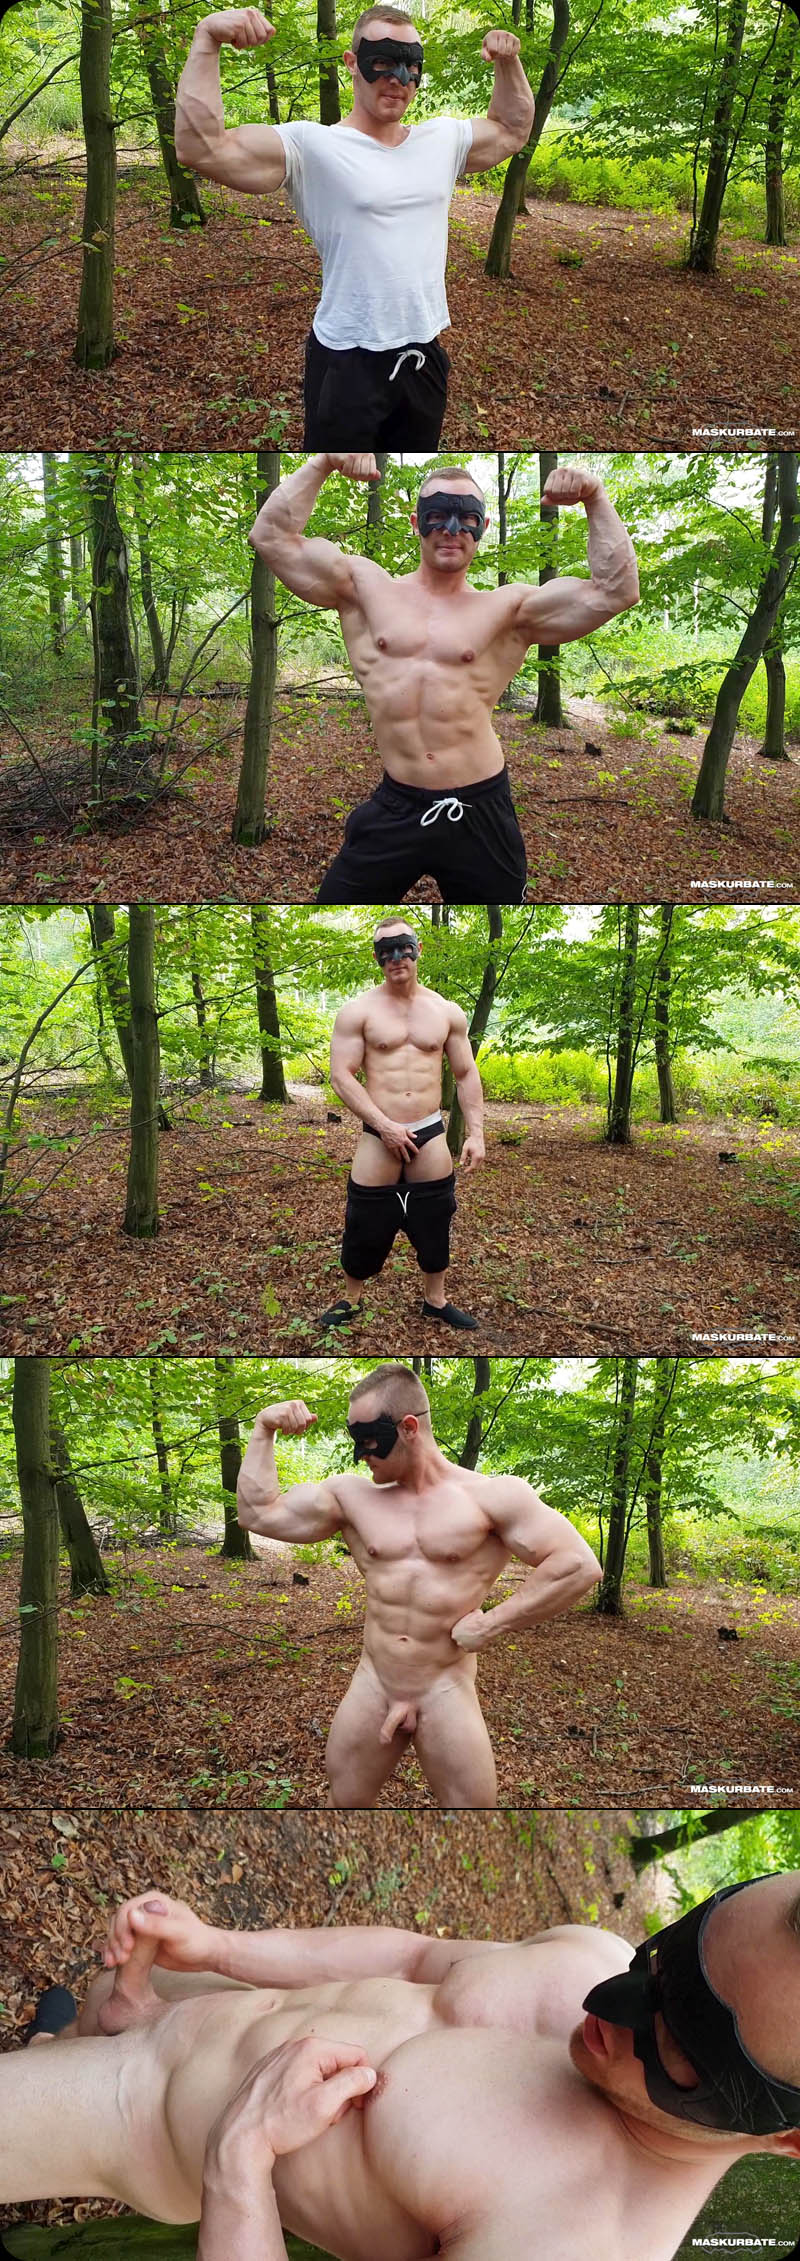 Zahn in 'A Woody In The Woods' at Maskurbate